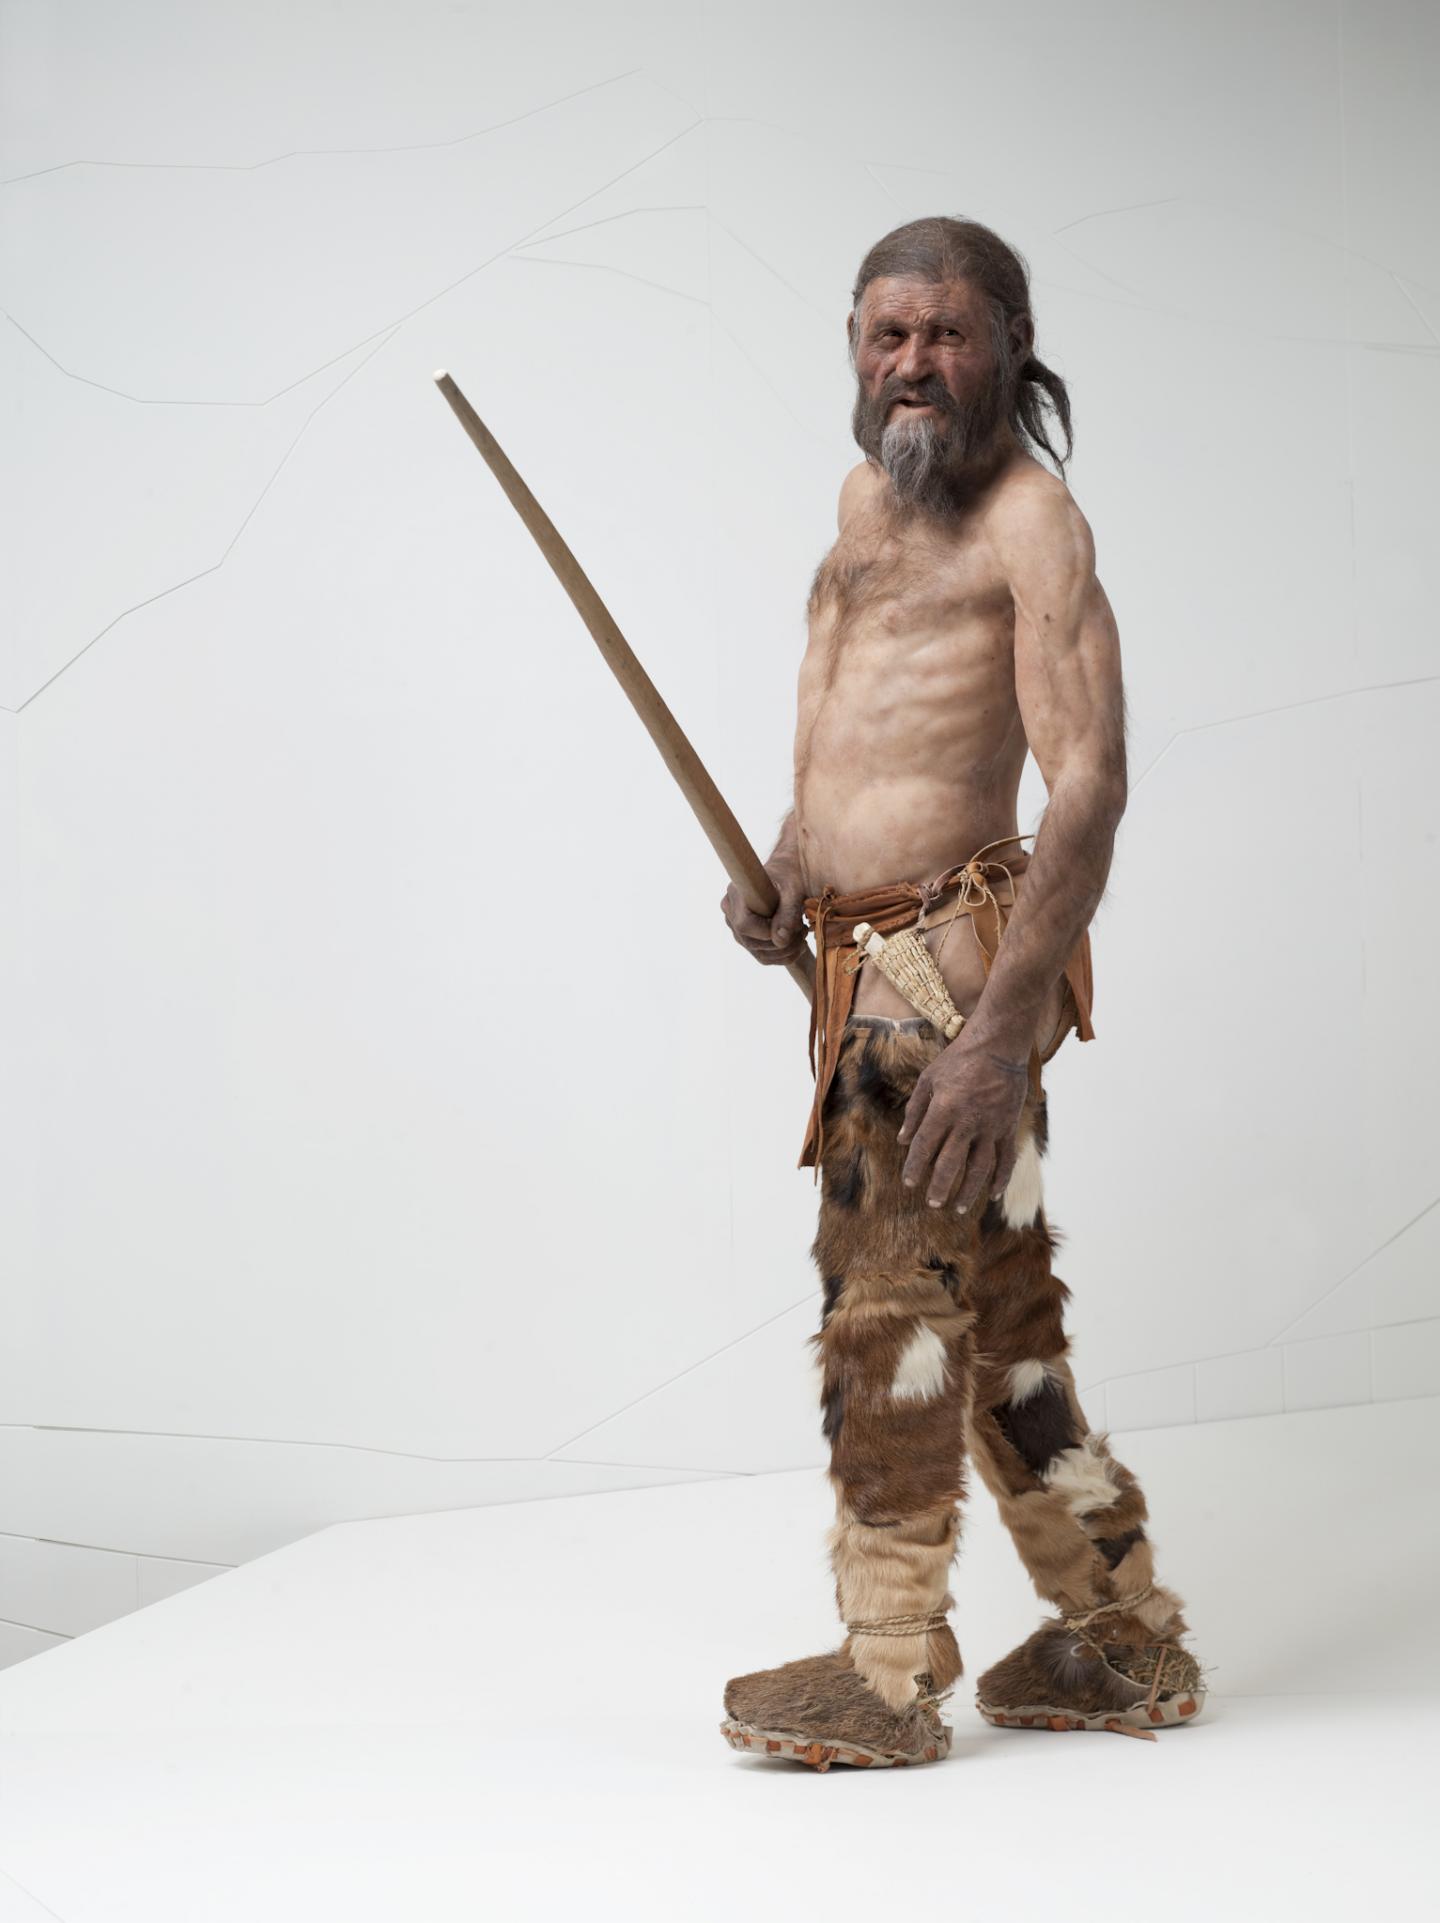 The 'Iceman,' a Reconstruction